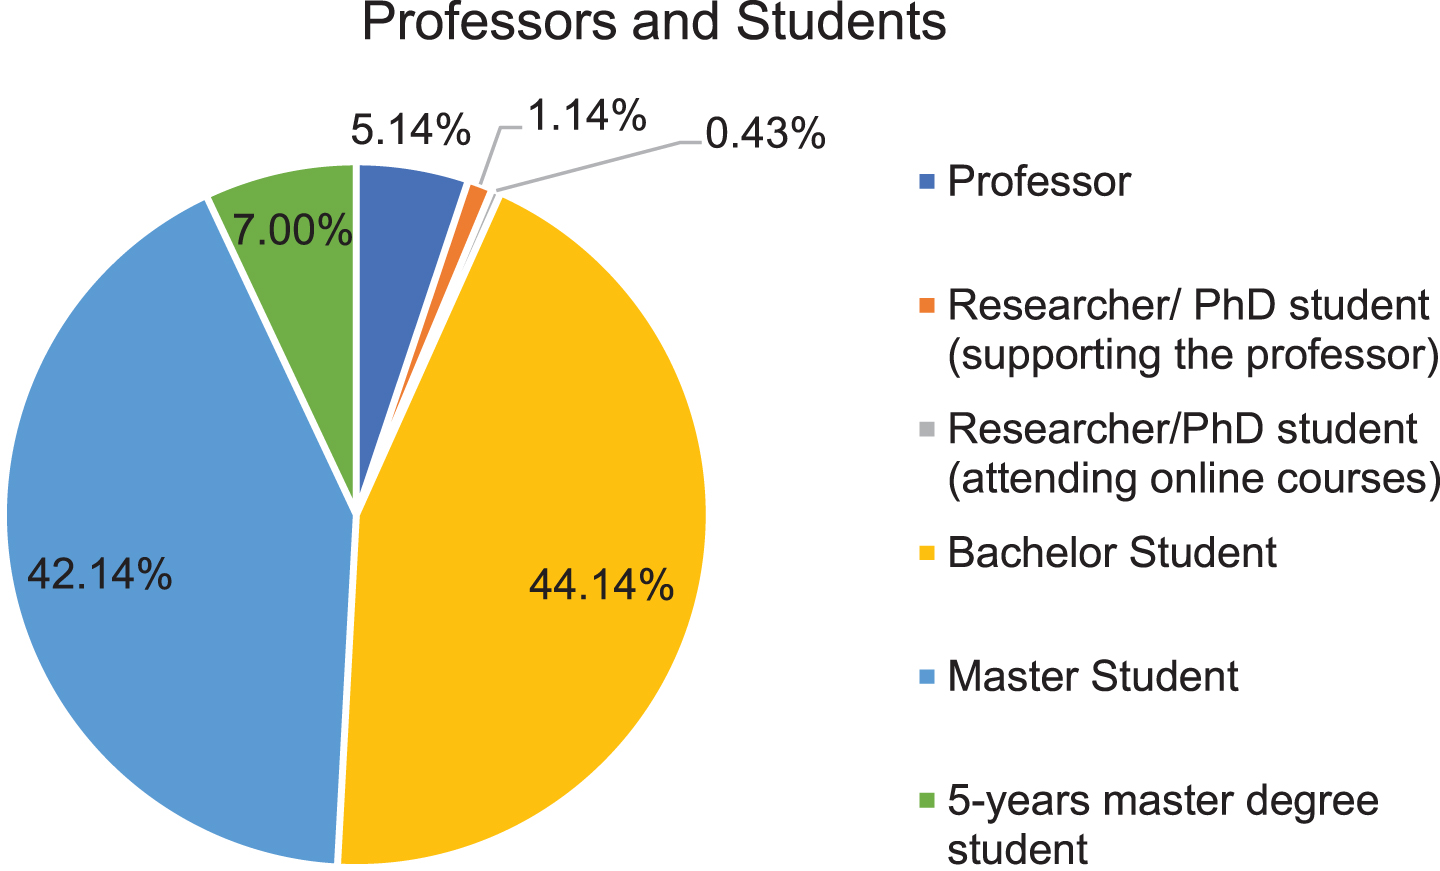 Percentages of students and professors.